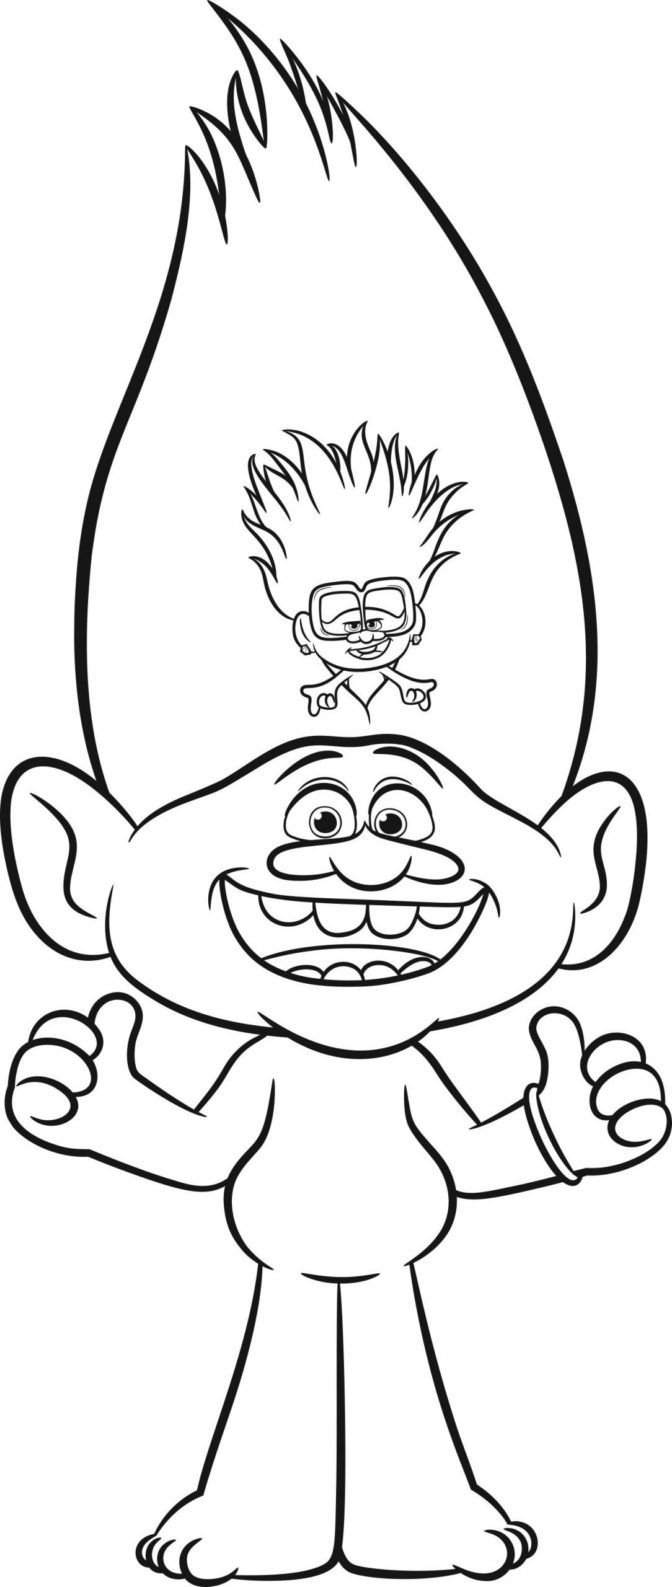 coloring pages : 64 Free Coloring Pages Trolls Picture Ideas Free Coloring  Pages For Adults Printable‚ Free Coloring Pages For Adults Fantasy‚ Free  Printable Coloring Pages or coloring pagess